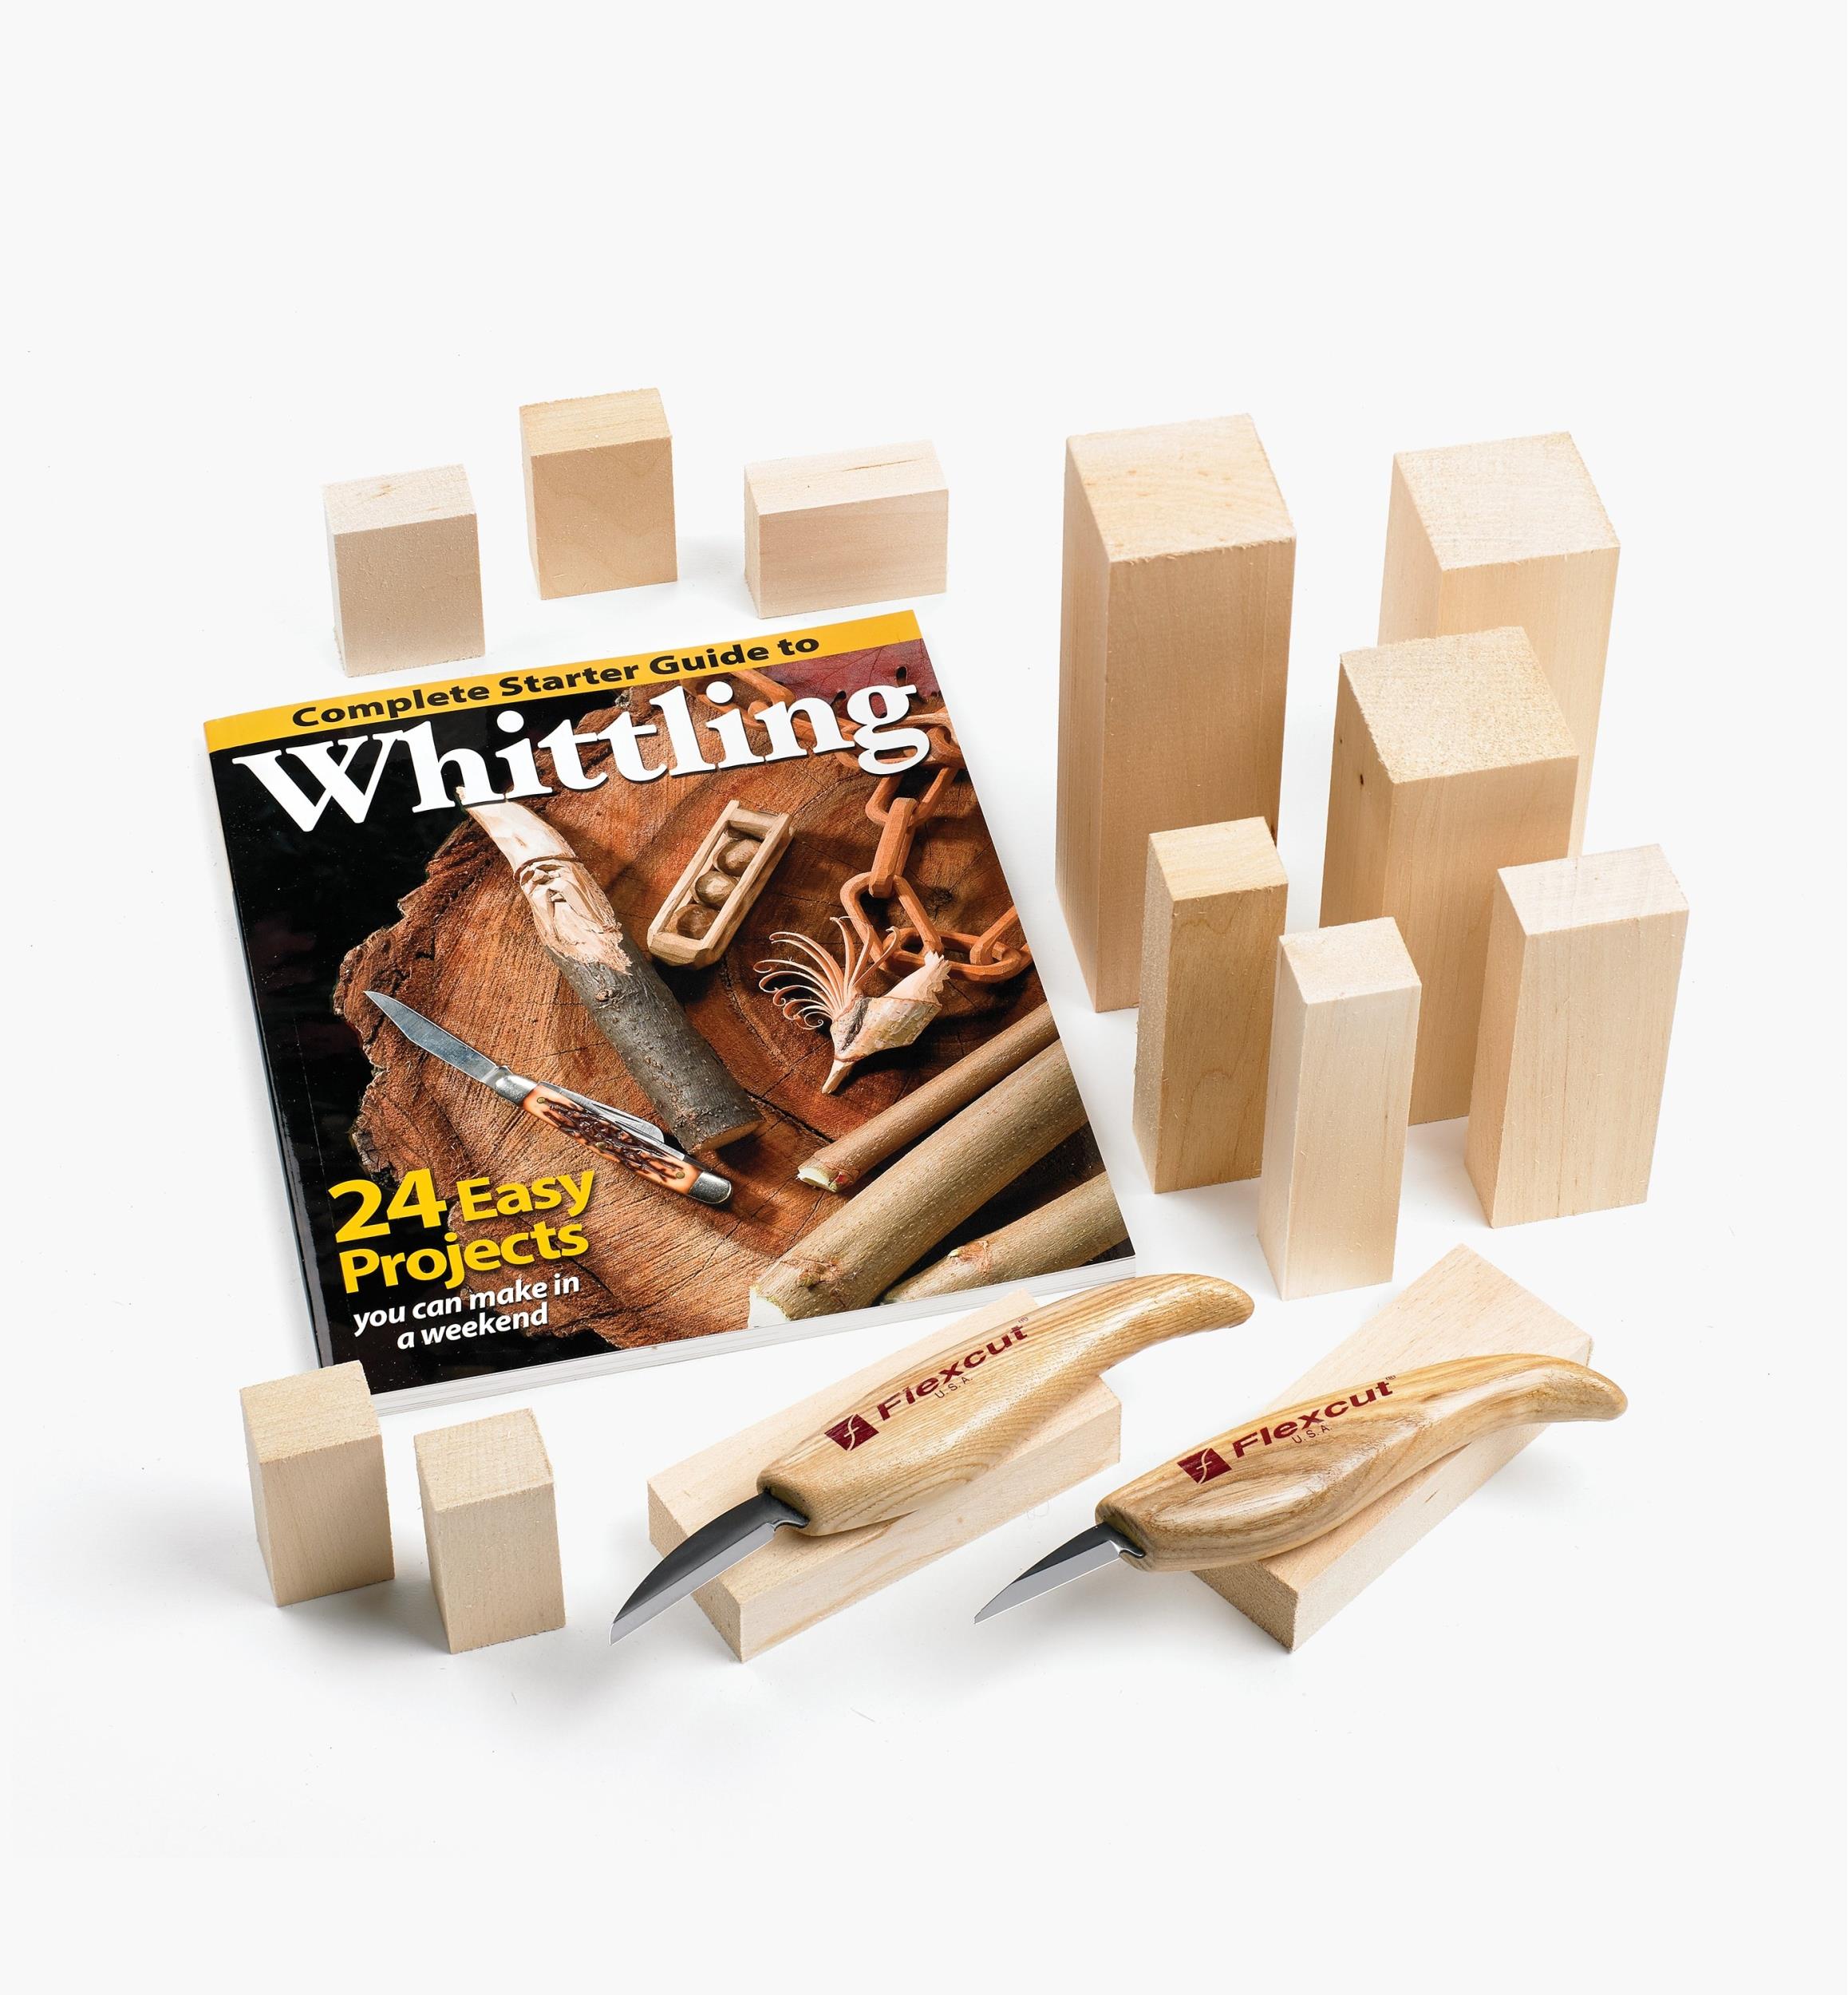 WHITTLING: A COMPLETE STEP-BY-STEP GUIDE eBook by AUSTINE BEN